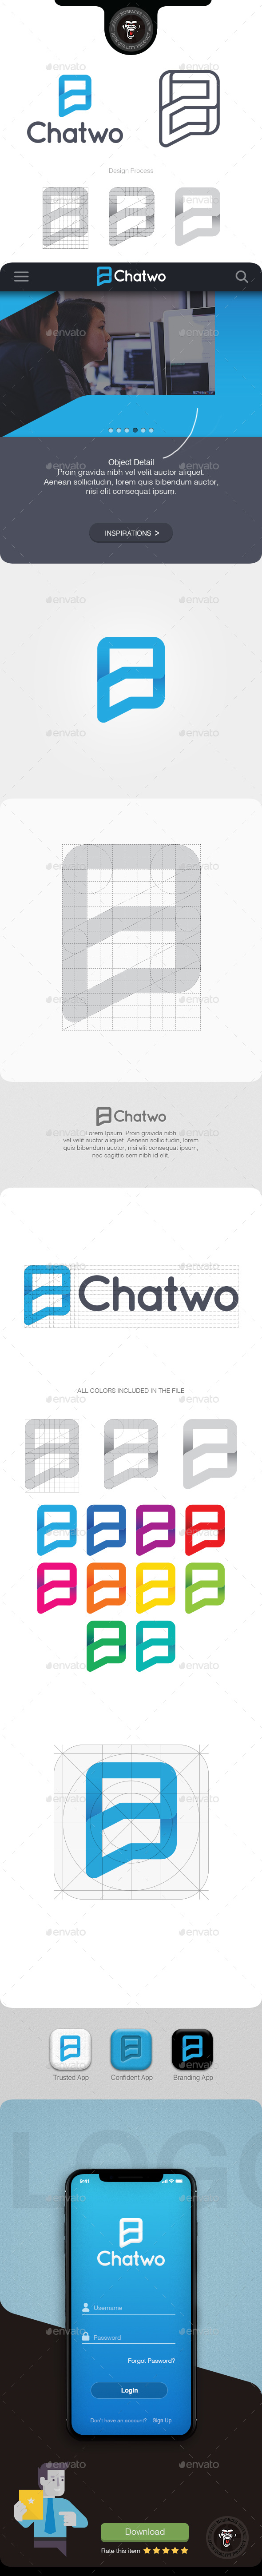 Chatwo